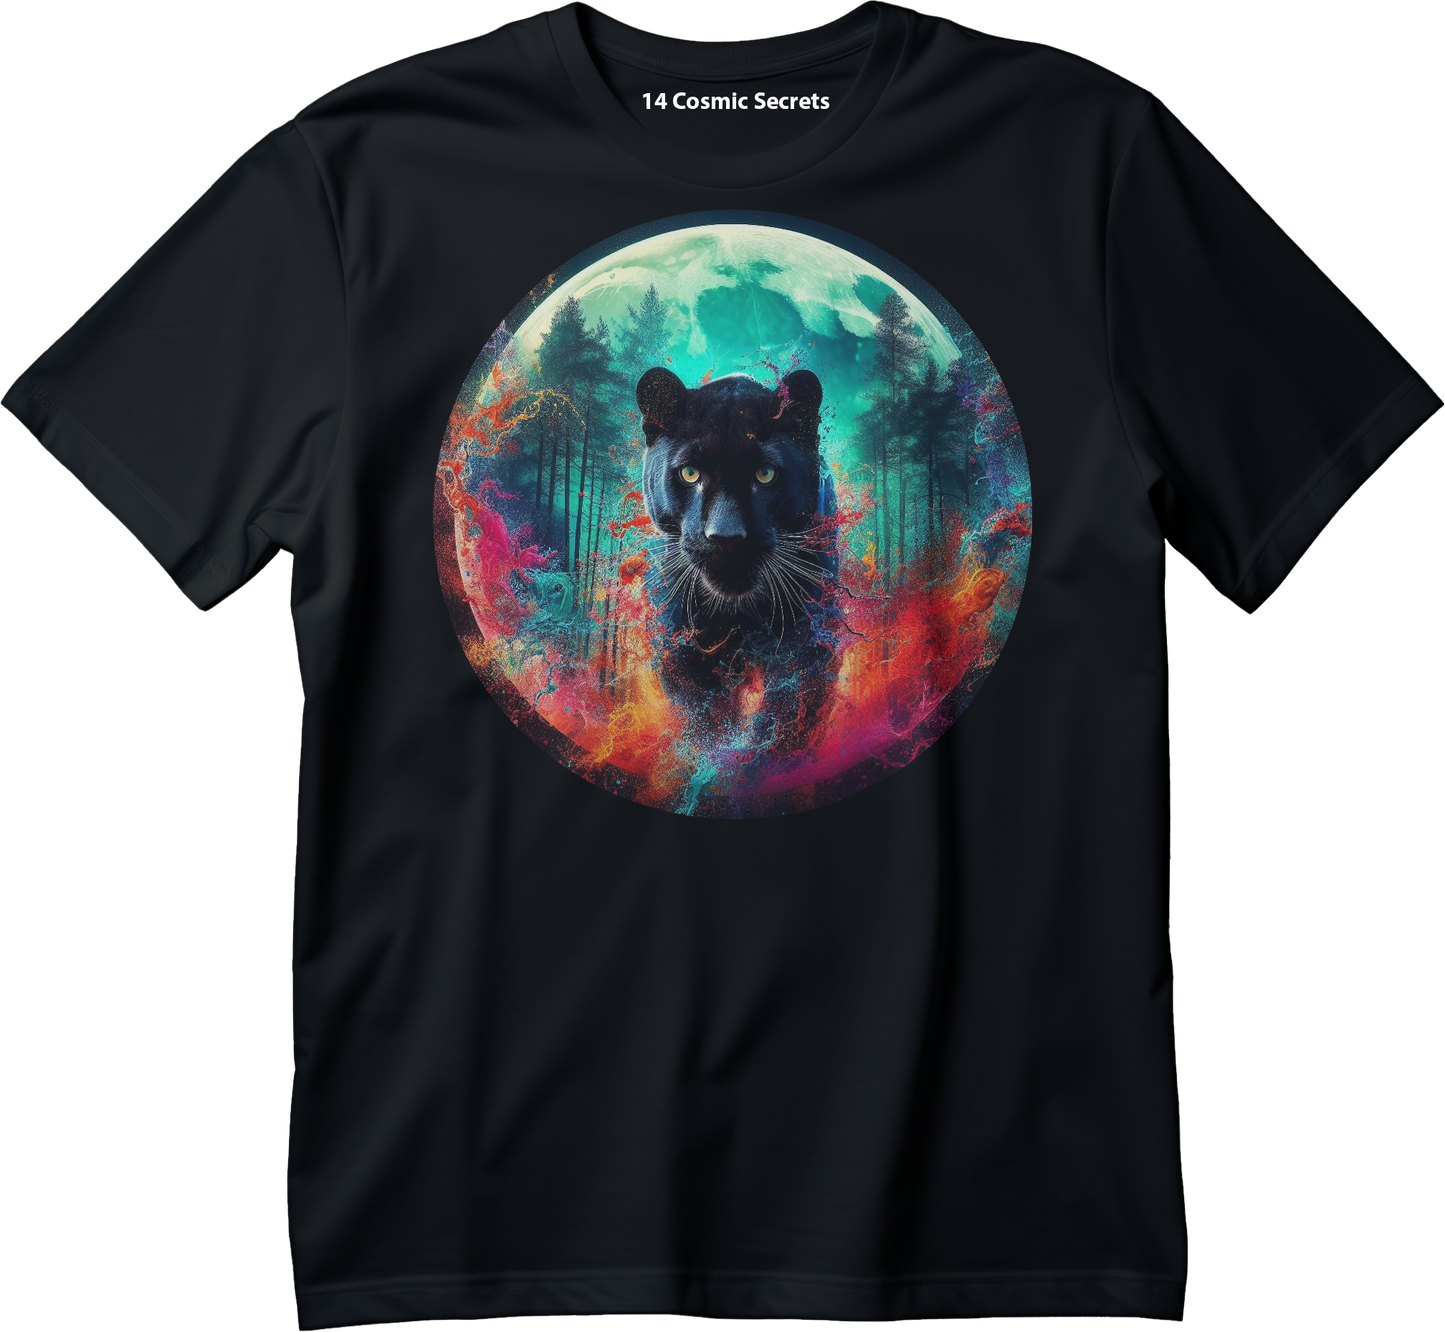 The Mesmerizing Gaze Graphic Printed T-Shirt  Cotton T-Shirt Magnificence of India T-Shirt